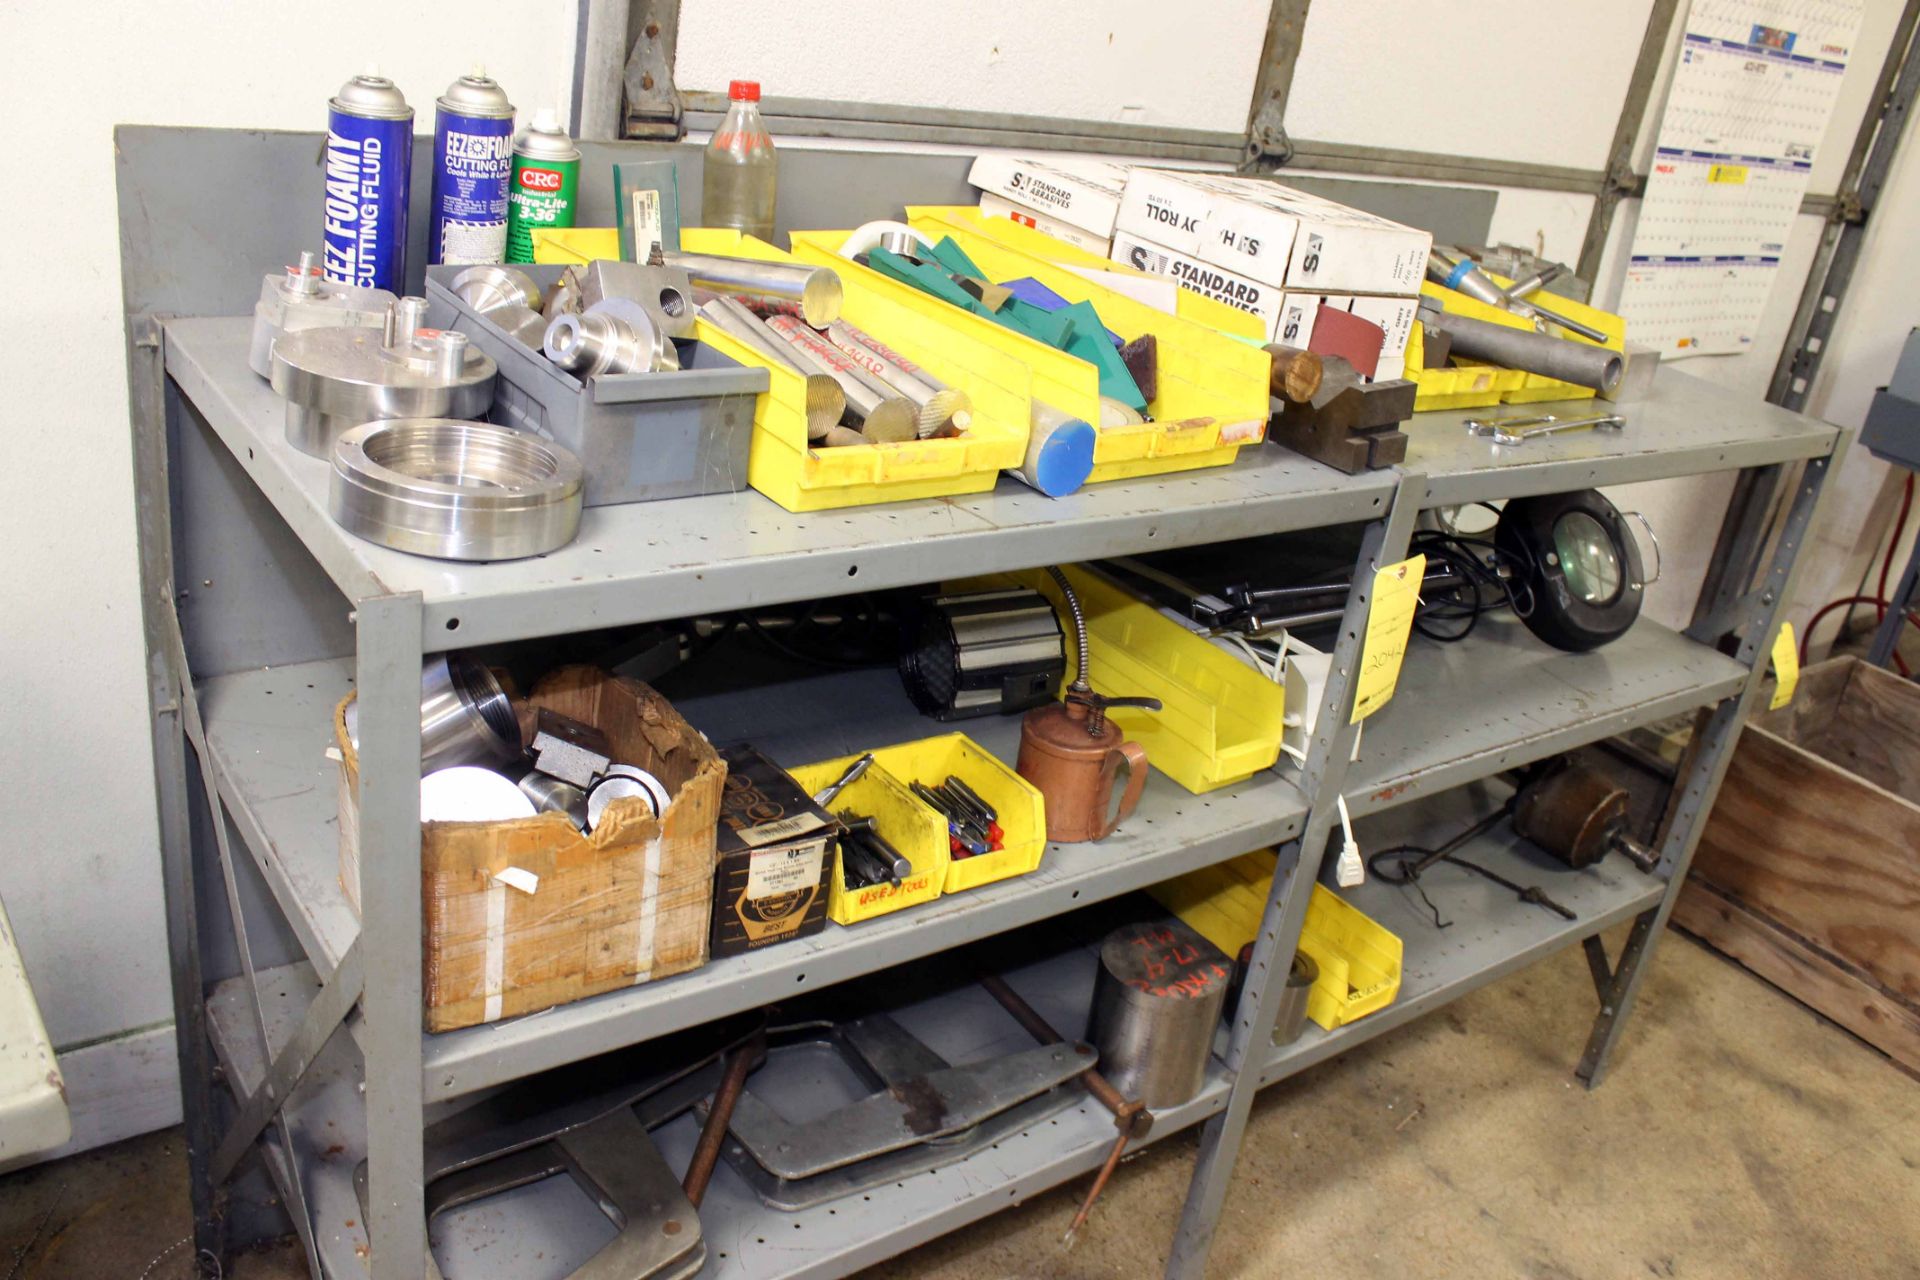 STEEL SHELVING UNIT, w/scrap metal, articulated lights, clamps, abrasives, etc.